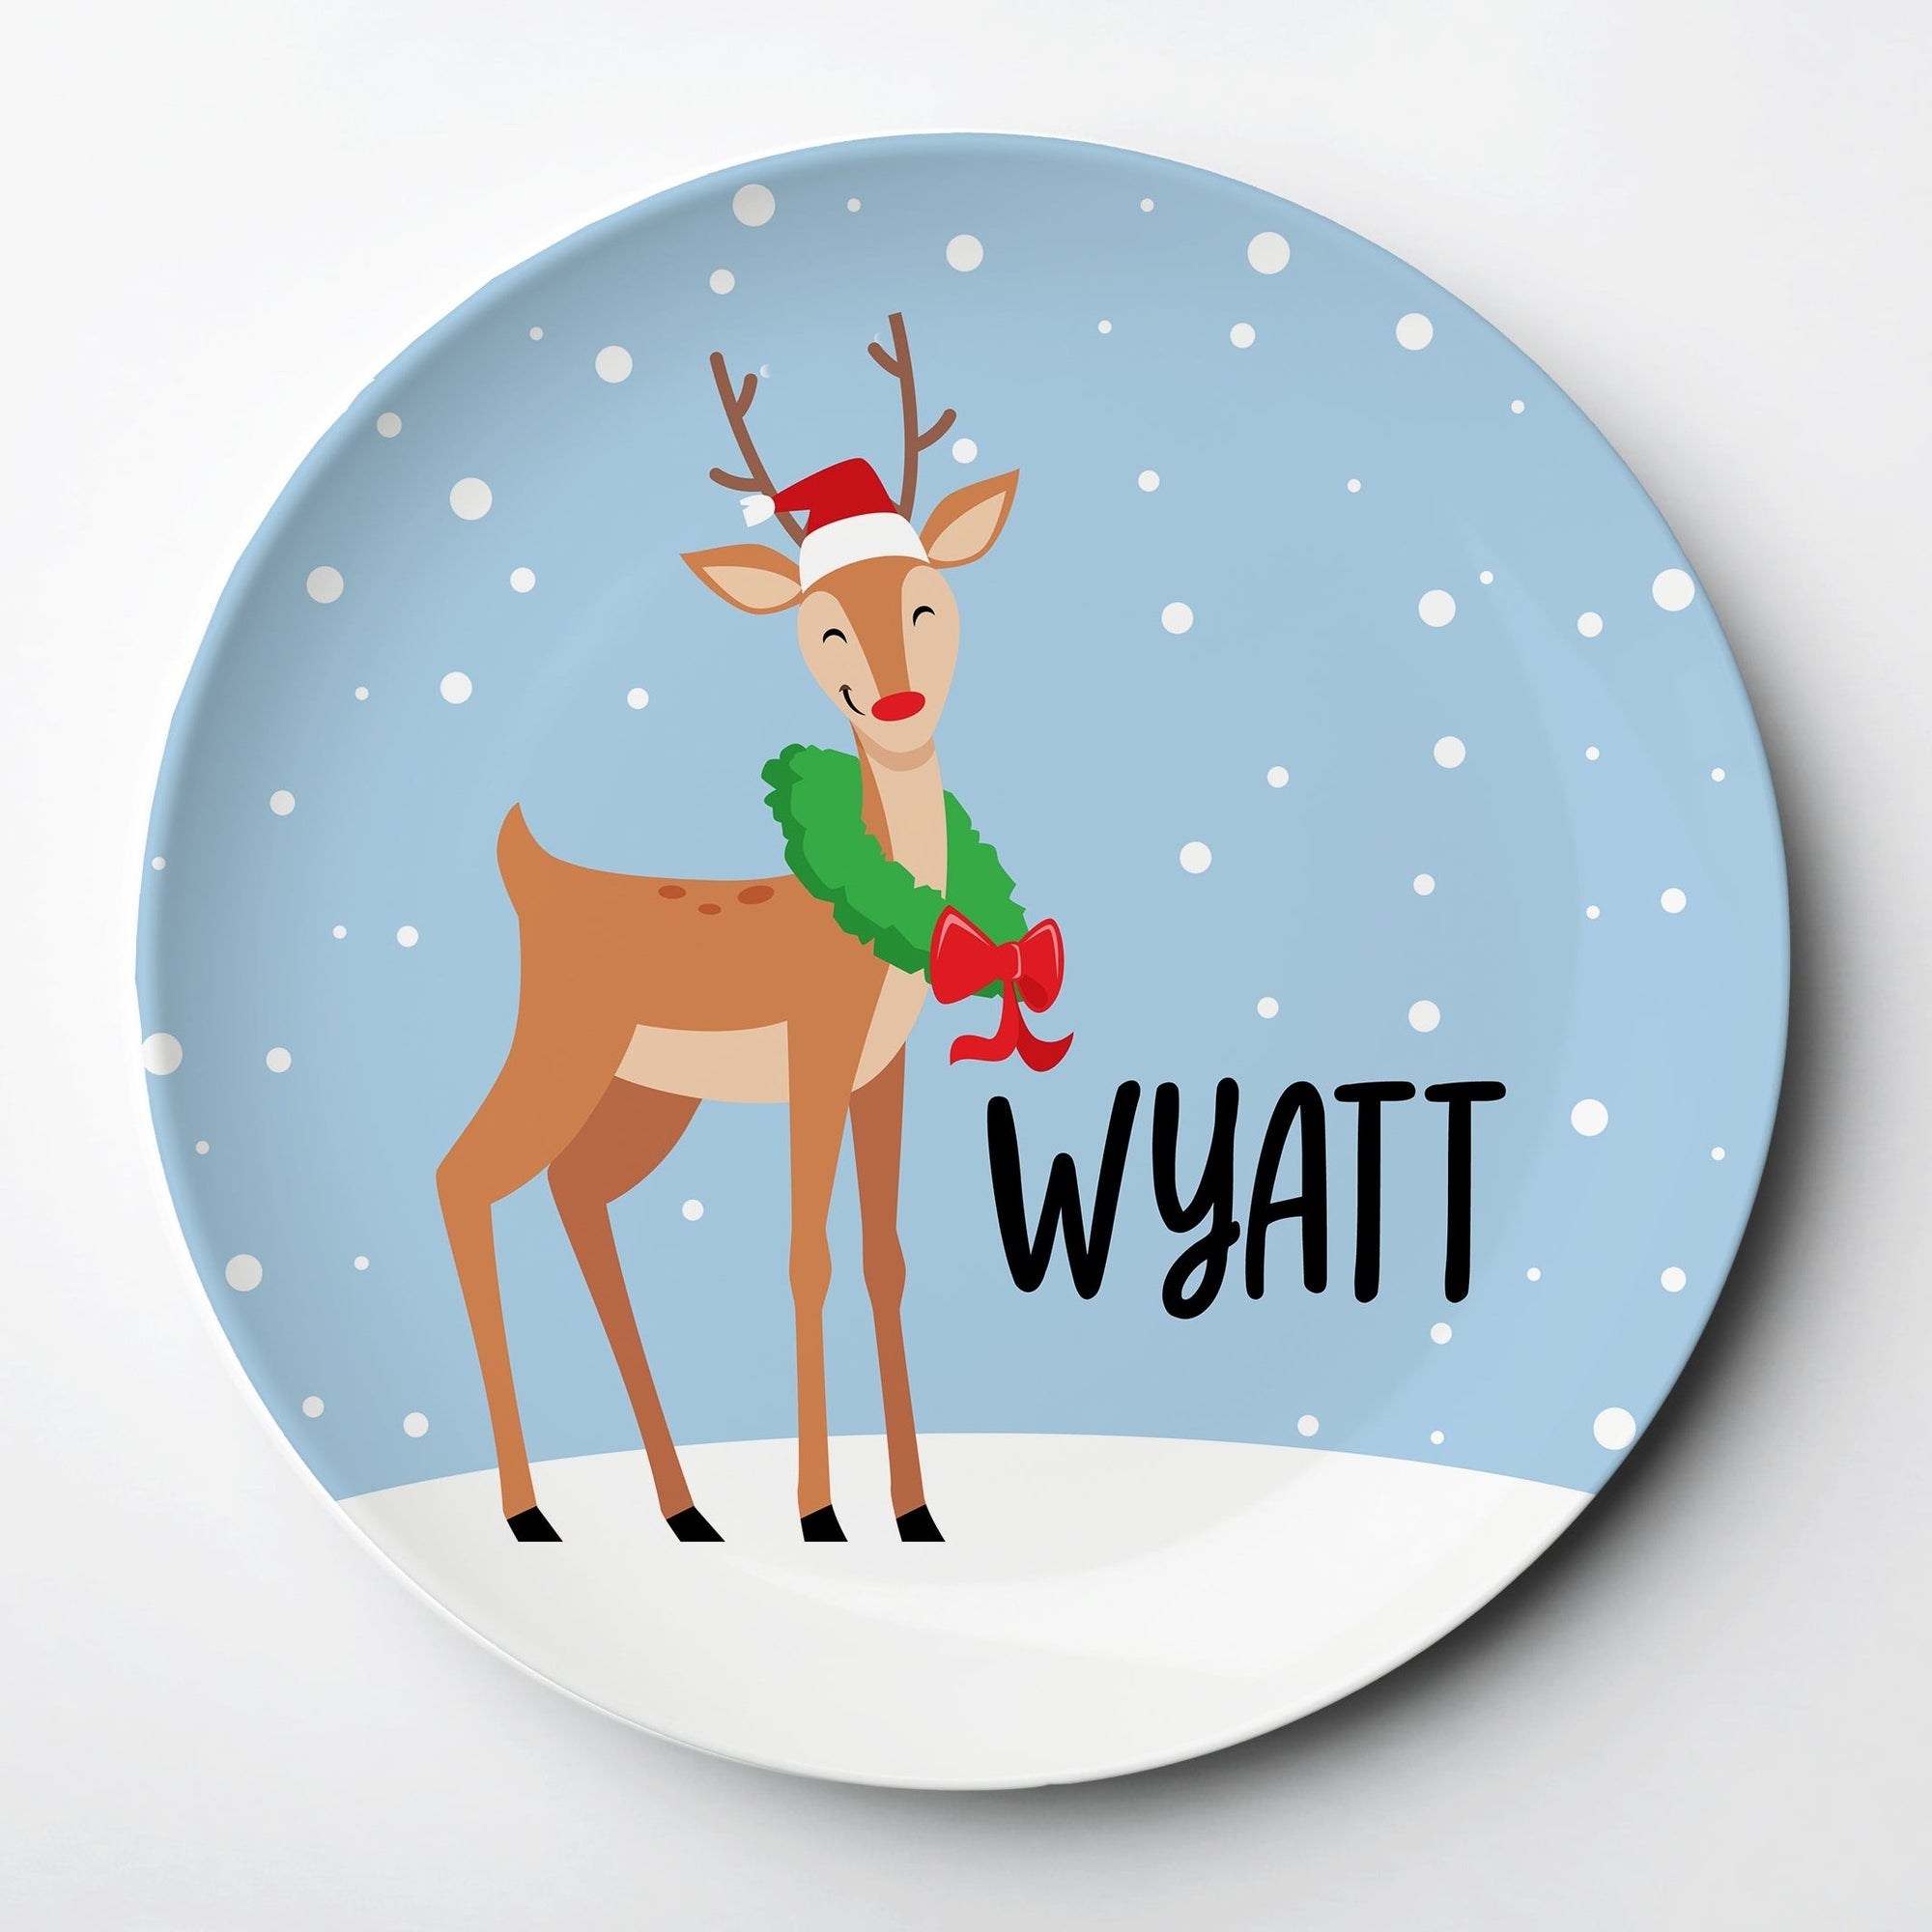 Reindeer Christmas Plate, personalized with your kid's name. Made of thick plastic, it is FDA approved. Free from melamine and BPA and all of the bad stuff. Safe for use in the dishwasher or microwave